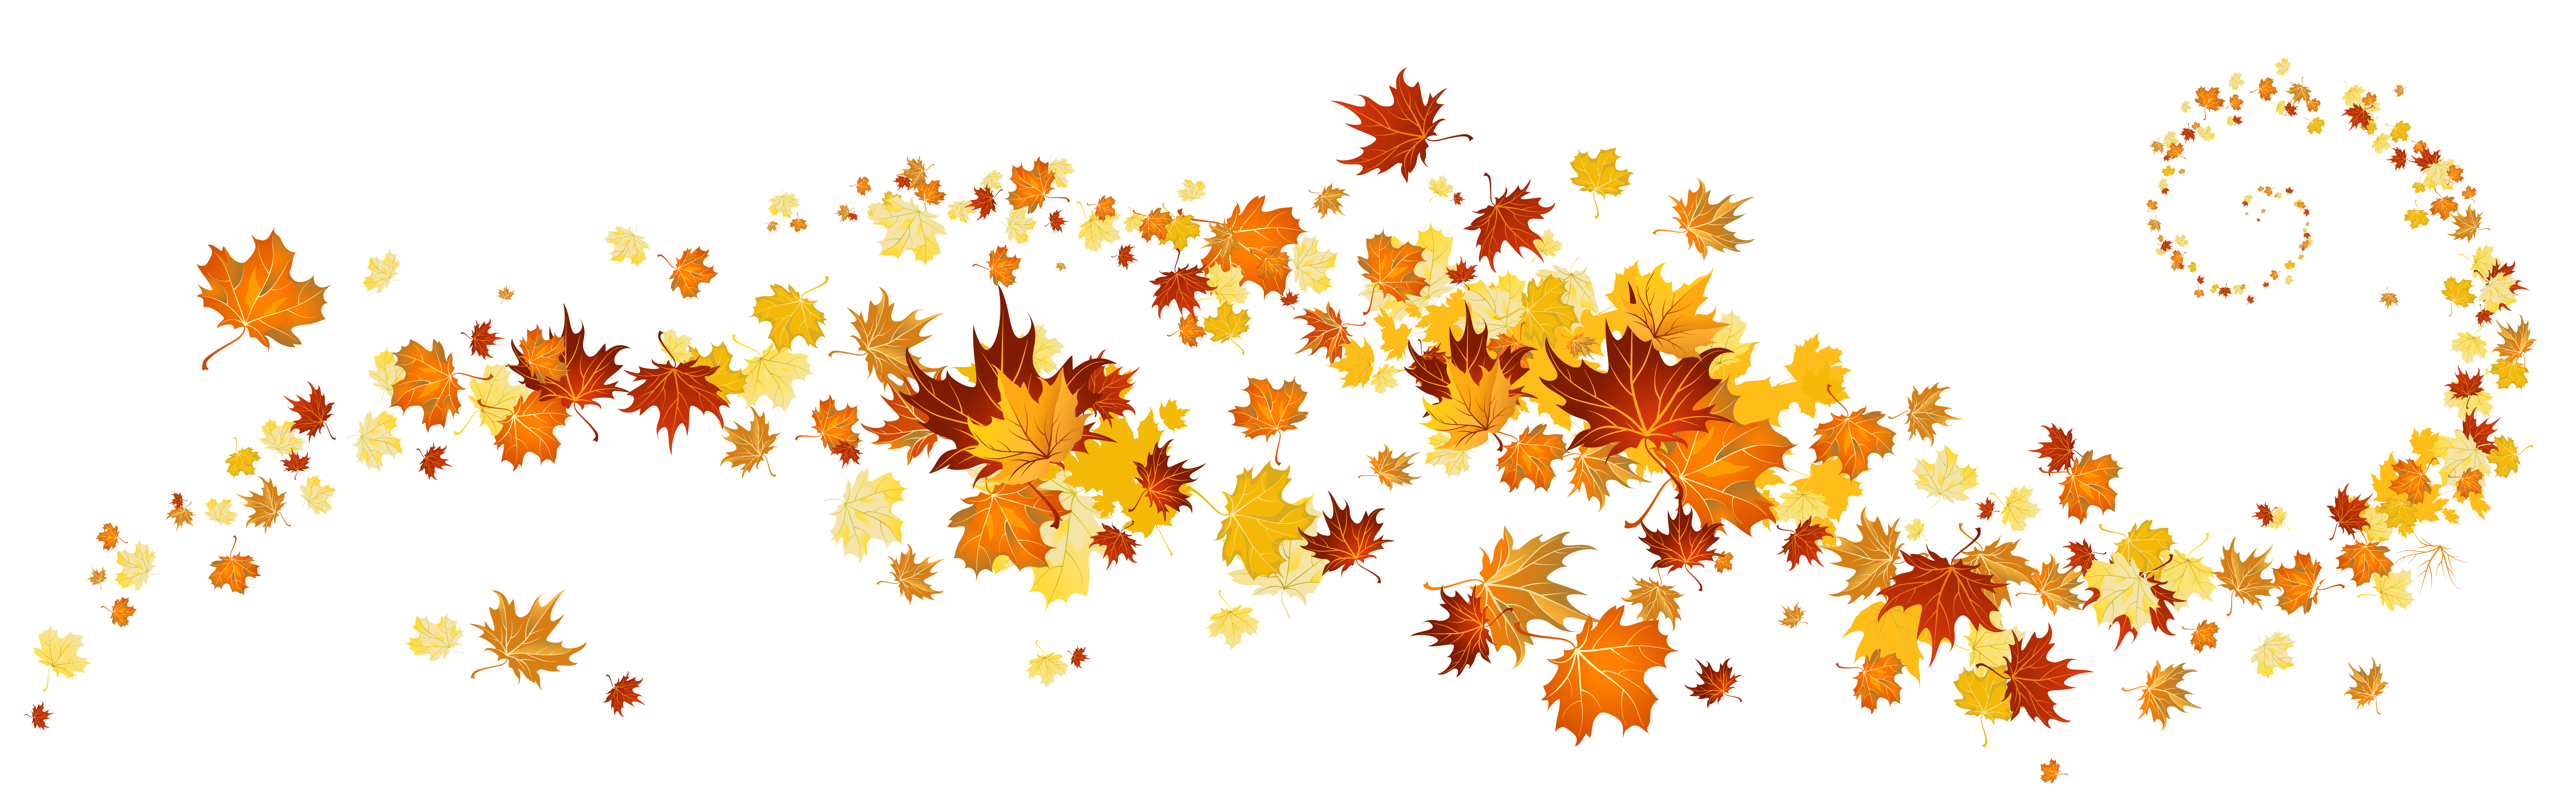 Autumn Leaves Free Download Clip Art 